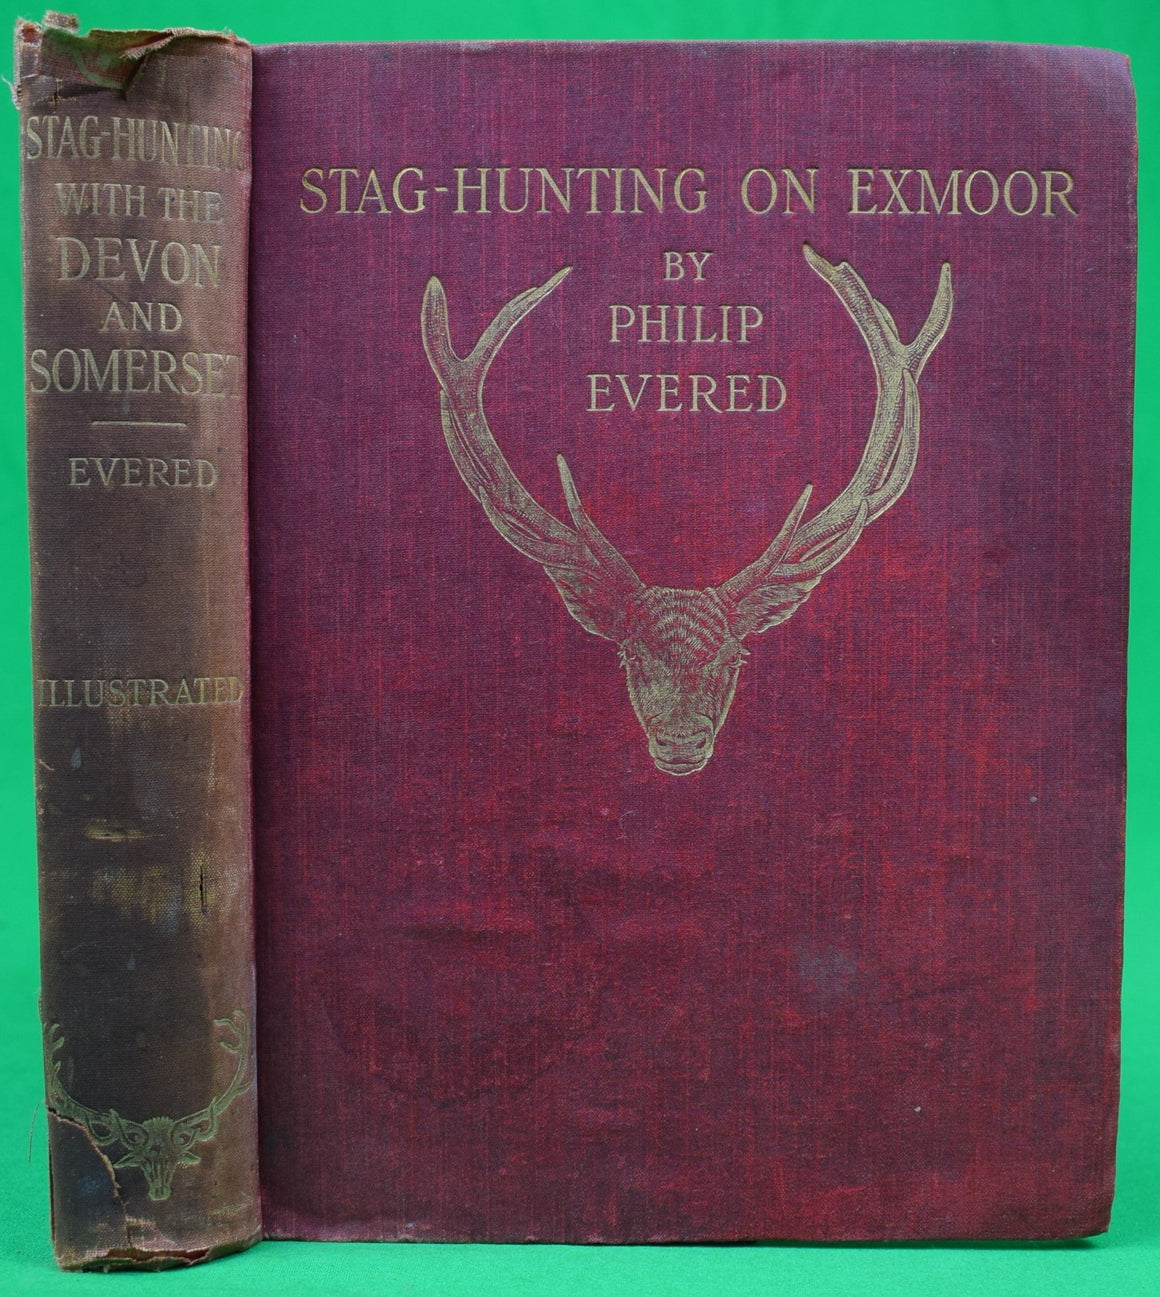 "Stag-Hunting On Exmoor" 1902 EVERED, Philip